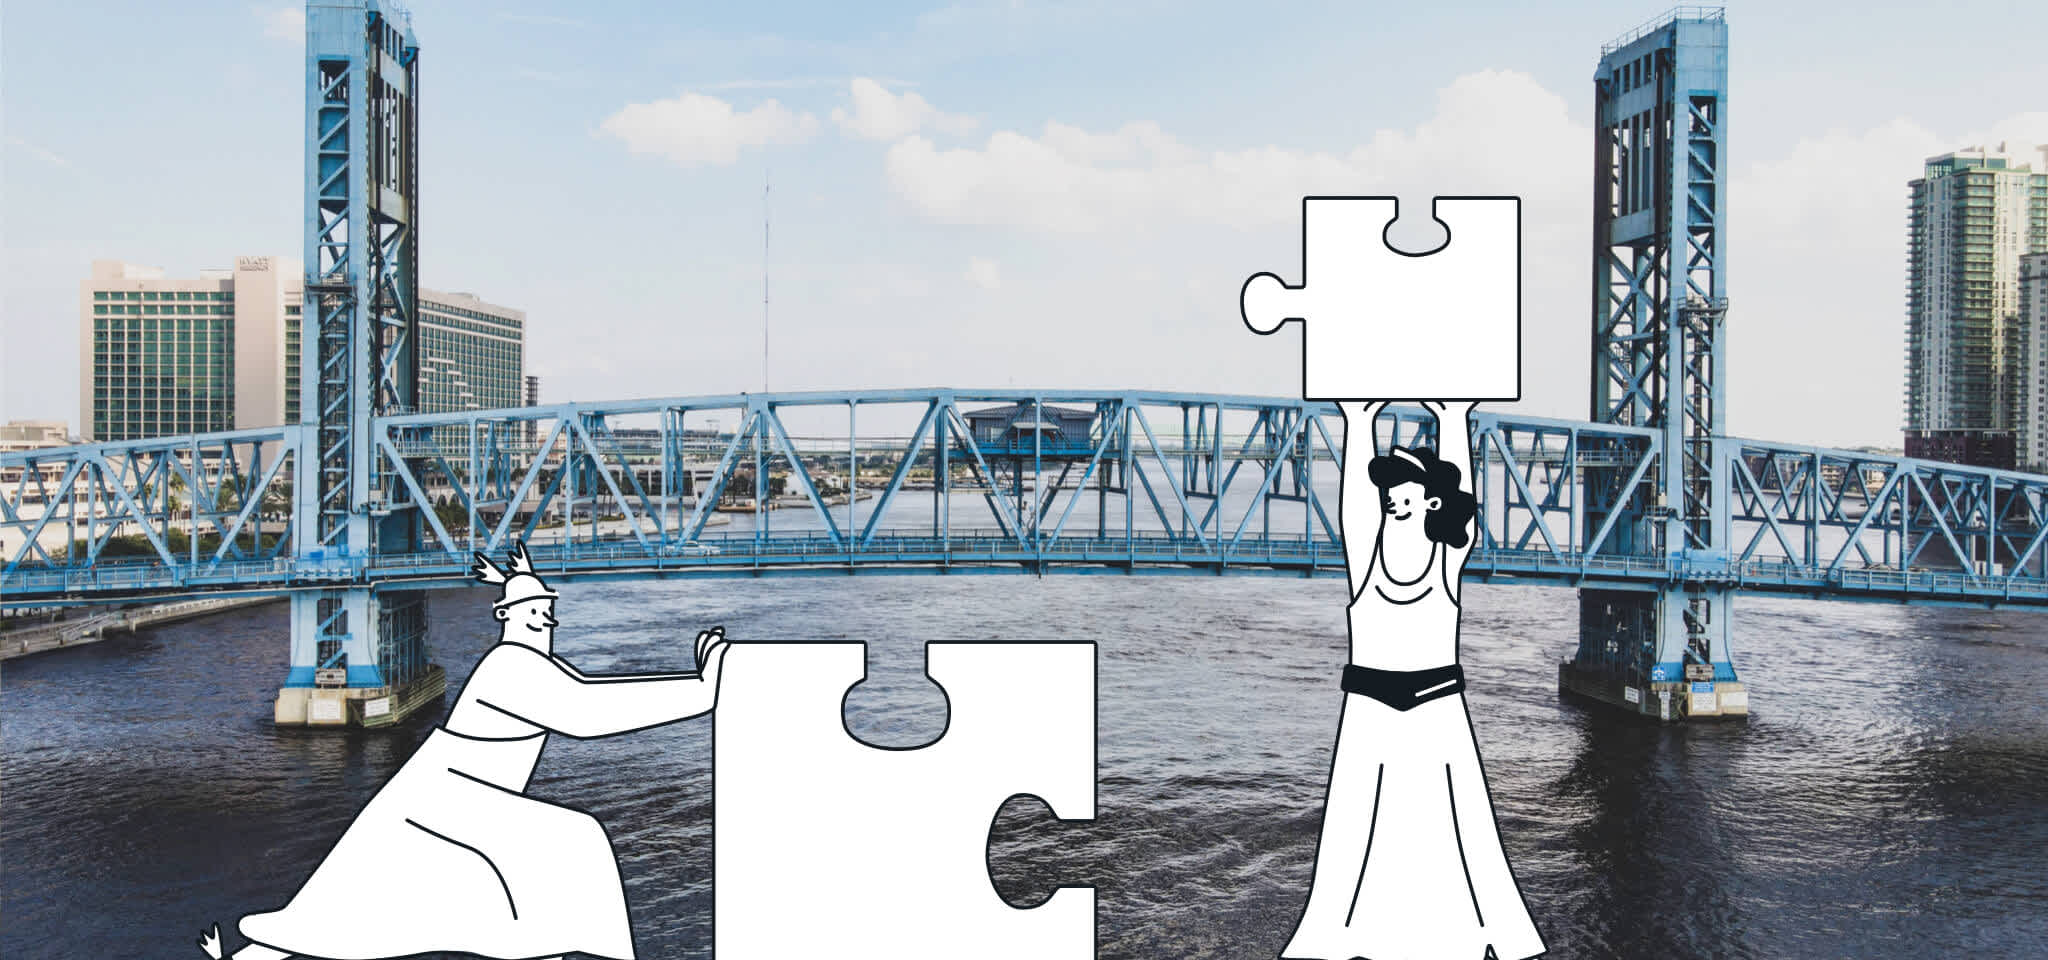 Hermes and a Goddess try to put two puzzle pieces together in front of a bridge